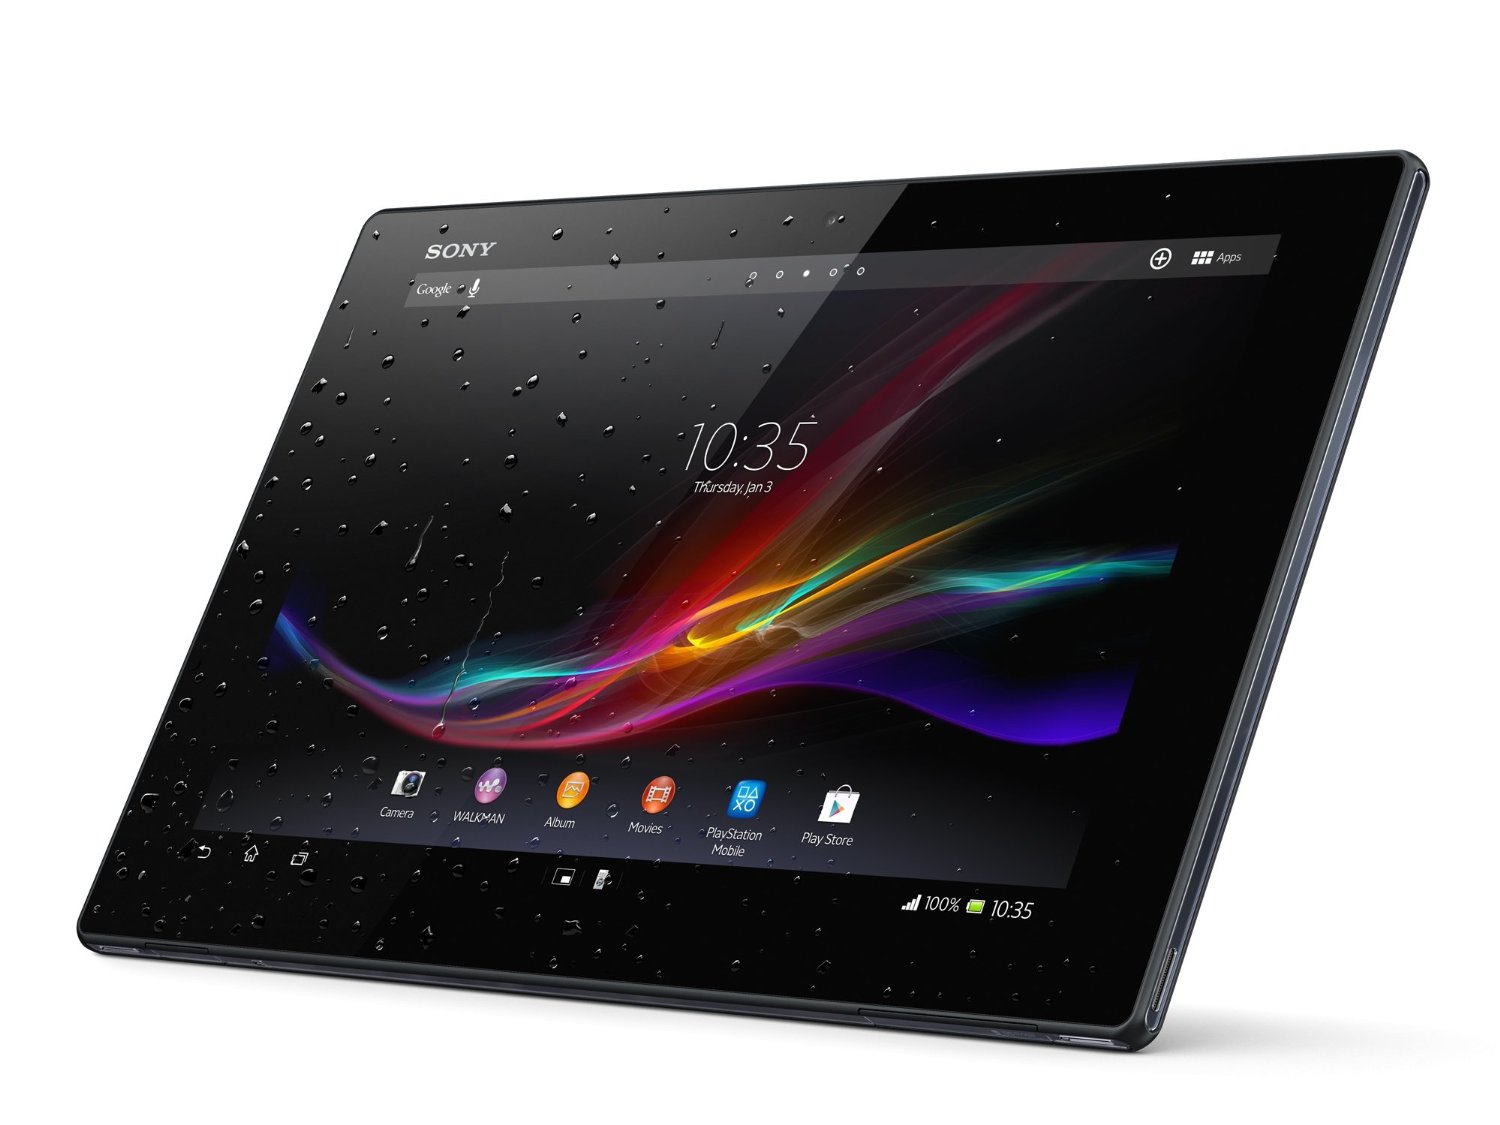 The Sony Xperia Tablet Z – so good I bought it twice